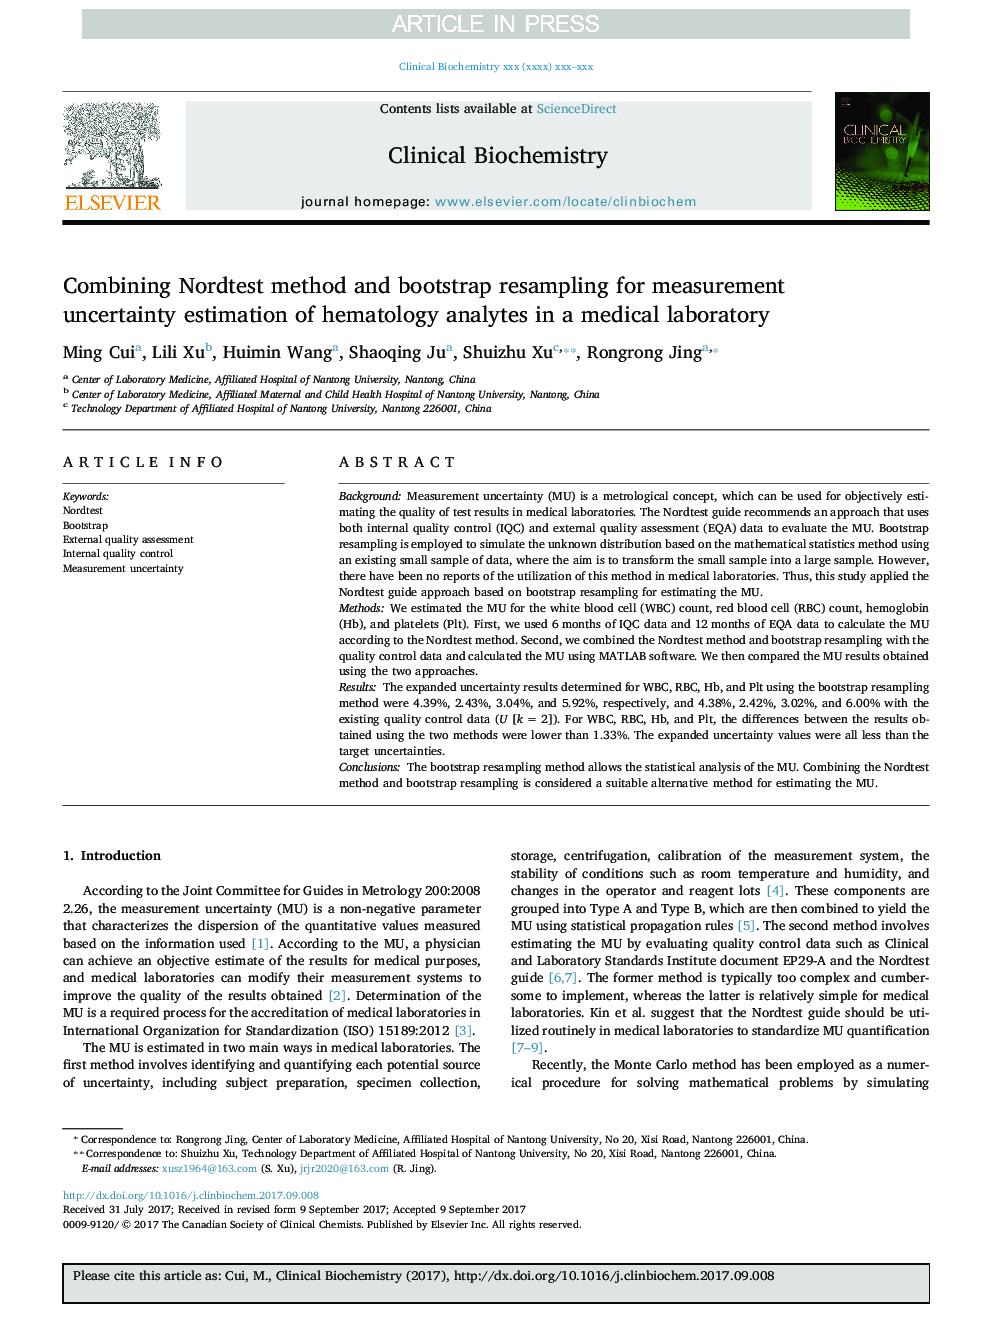 Combining Nordtest method and bootstrap resampling for measurement uncertainty estimation of hematology analytes in a medical laboratory